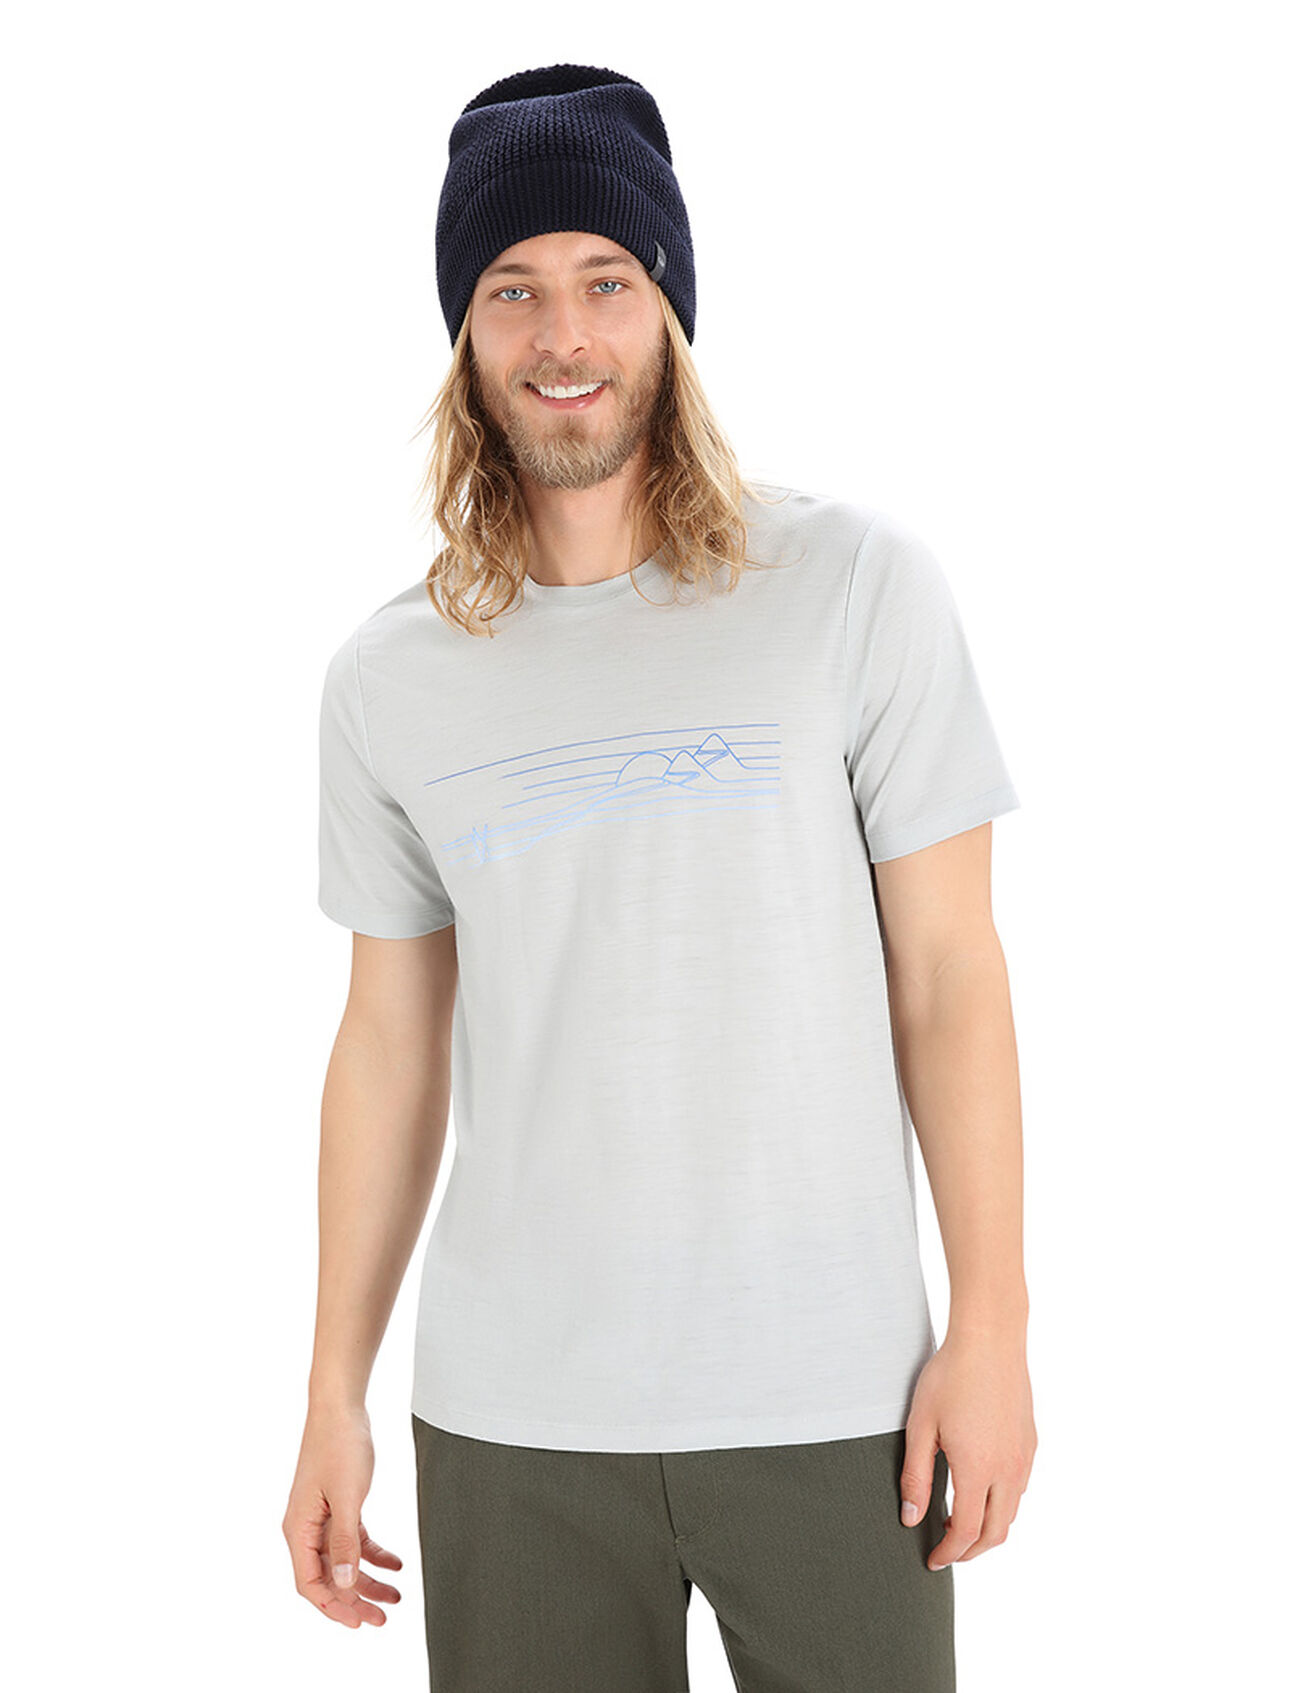 Mens Merino Tech Lite II Short Sleeve T-Shirt Ski Stripes Our versatile tech tee that provides comfort, breathability and natural odor-resistance for any adventure you can think of, the Tech Lite II Short Sleeve Tee Ski Stripes features 100% merino for all-natural performance. The tee’s original artwork by Damon Watters features a gradient illustration of a classic ski field.